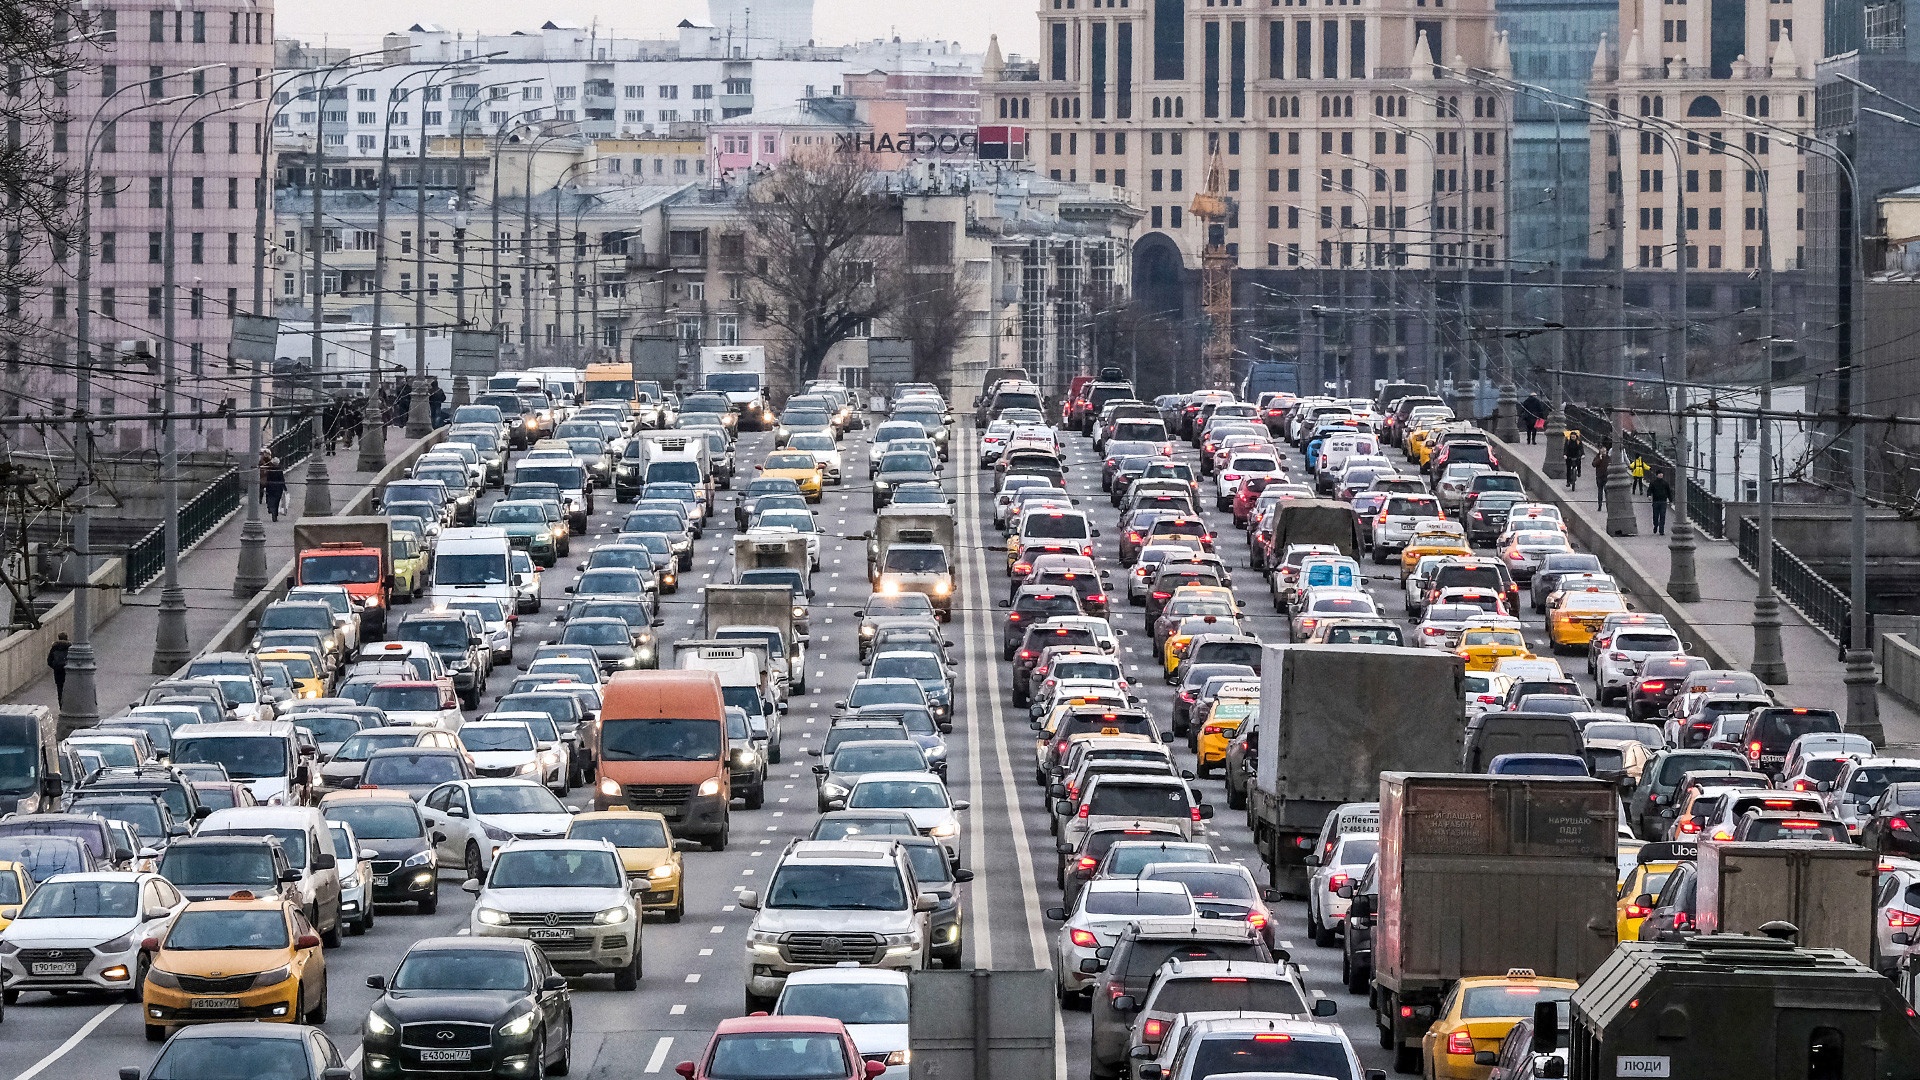 Cars slowly move along a bridge in traffic jam in central Moscow on March 6, 2020